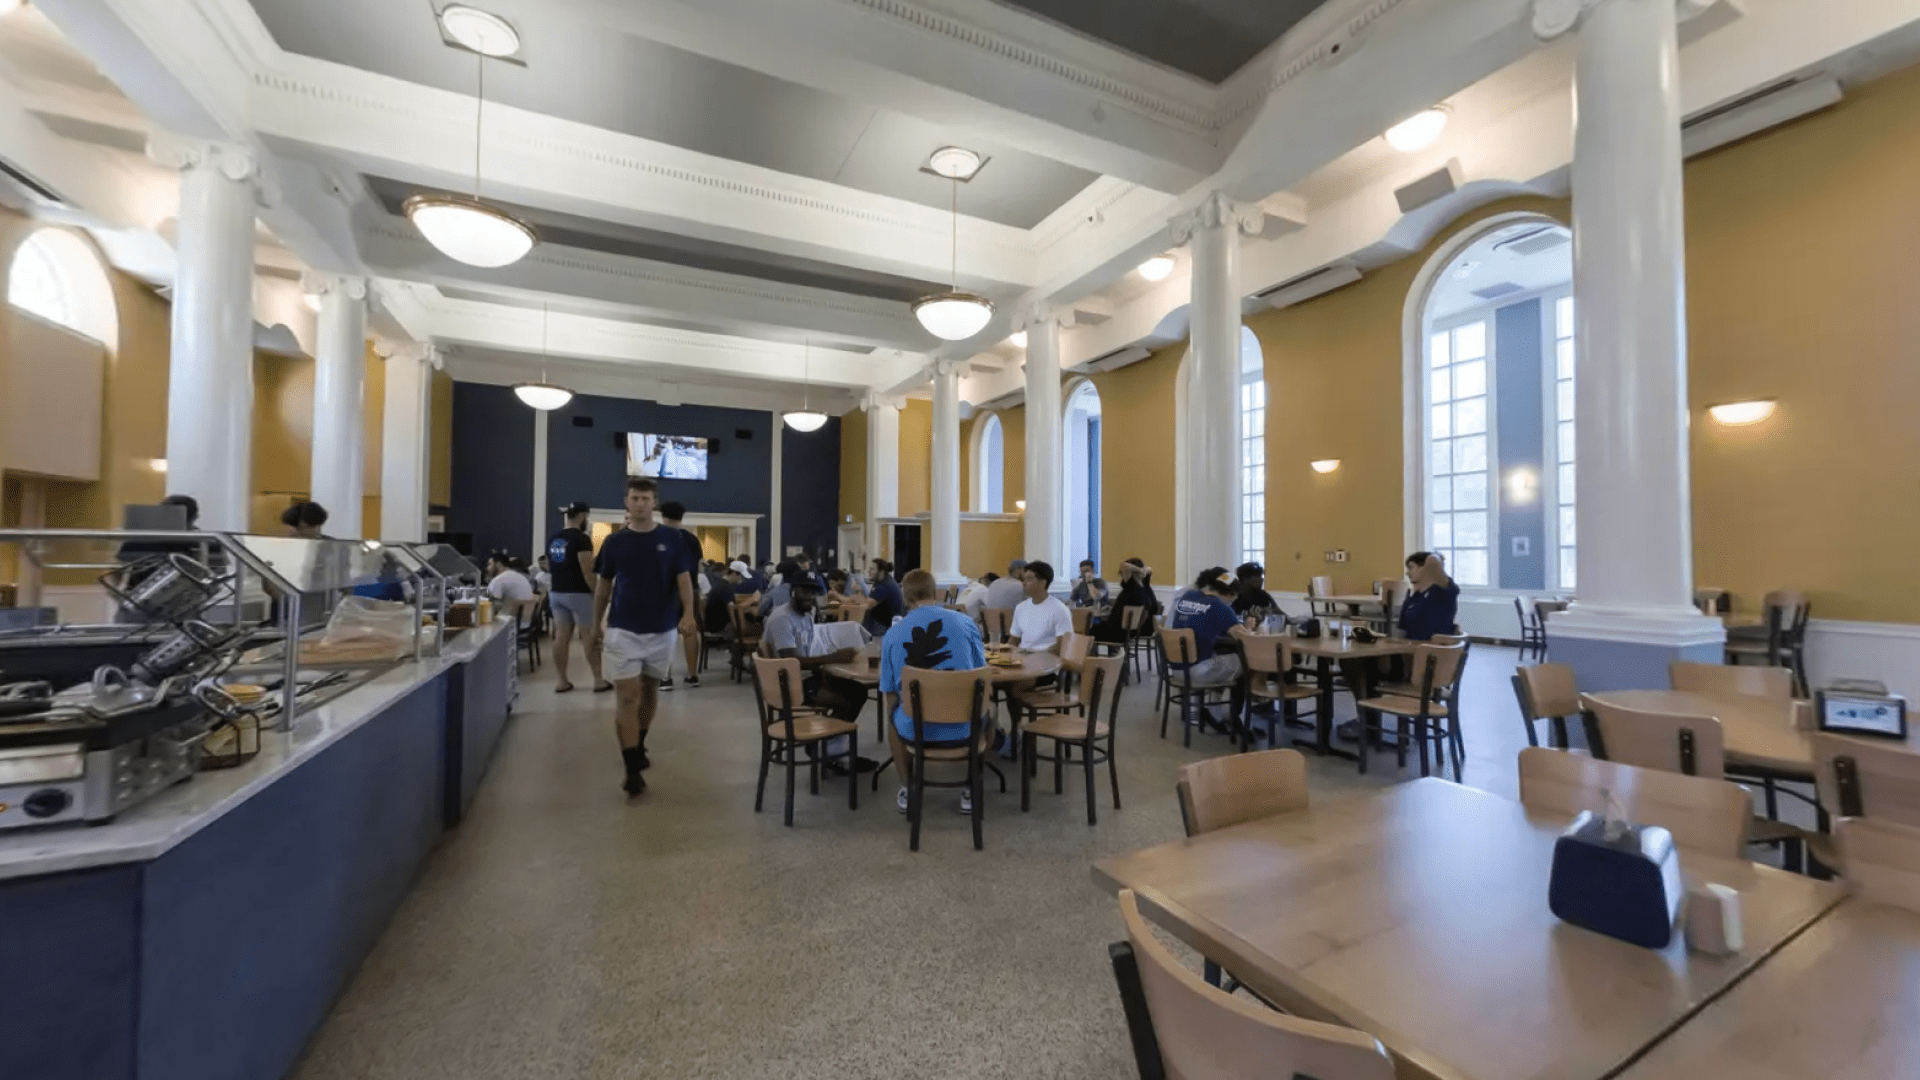 Students in campus dining hall